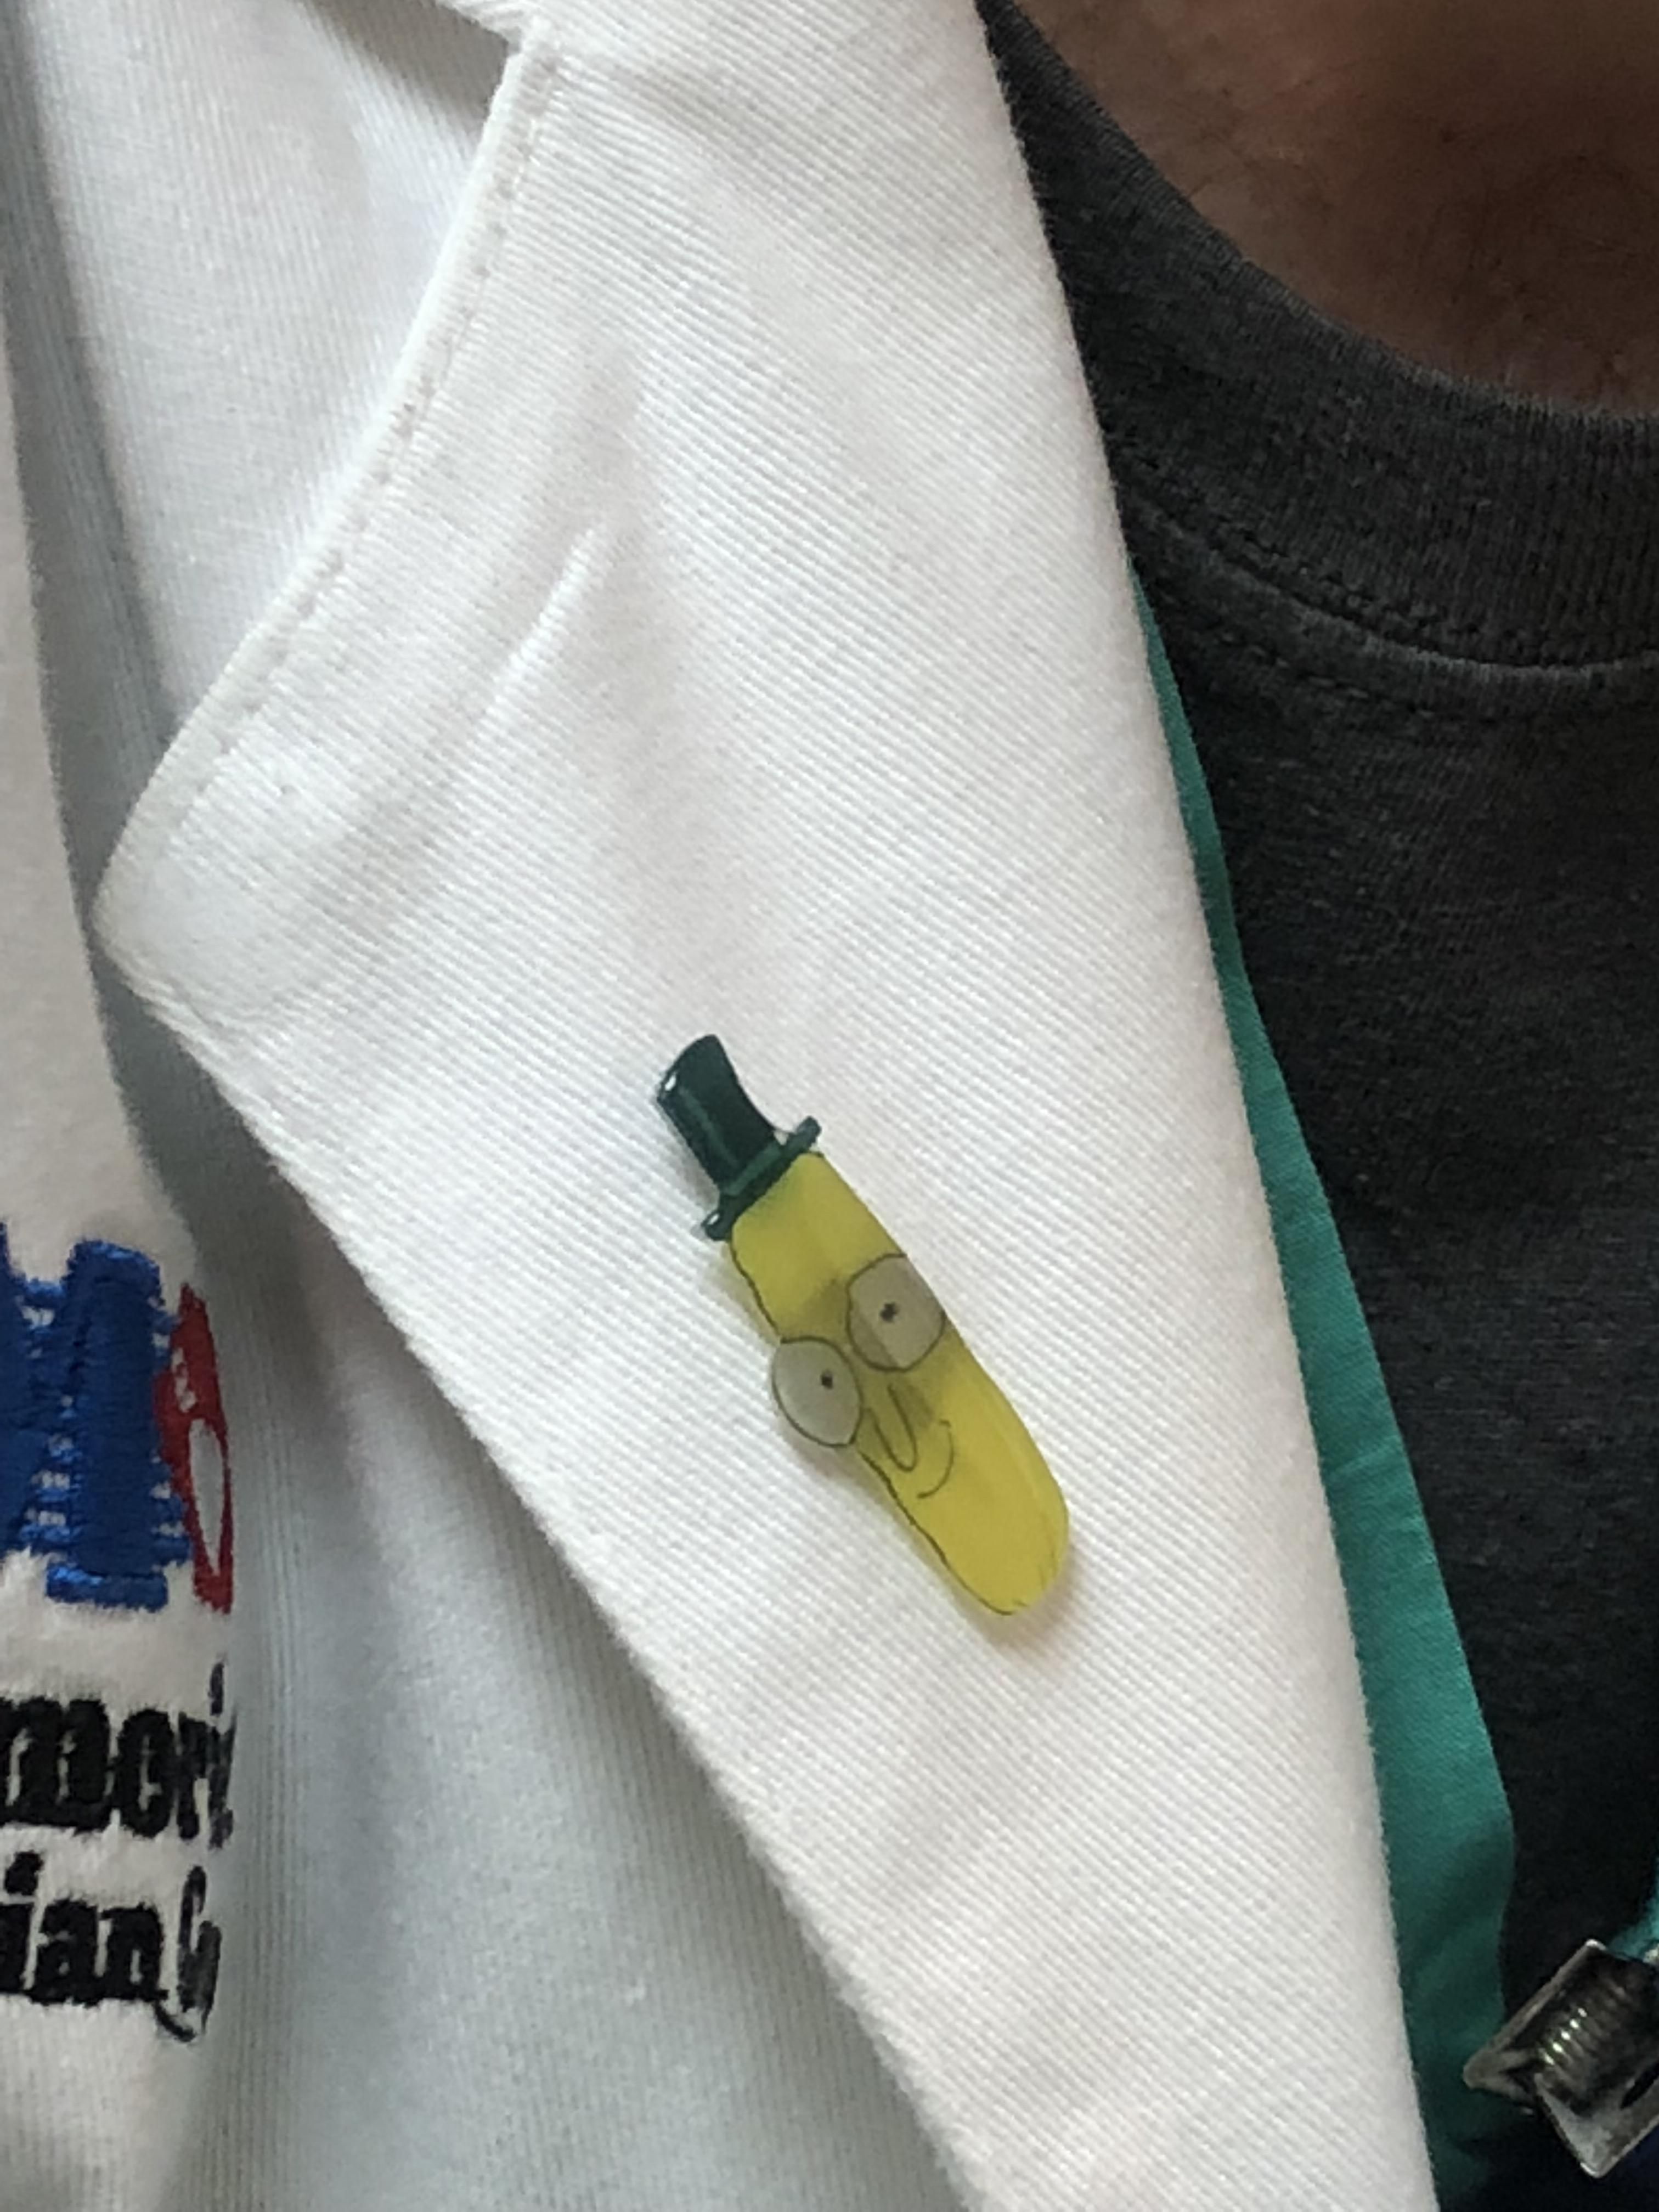 My colon doctor has a Mr. Poopybutthole pin